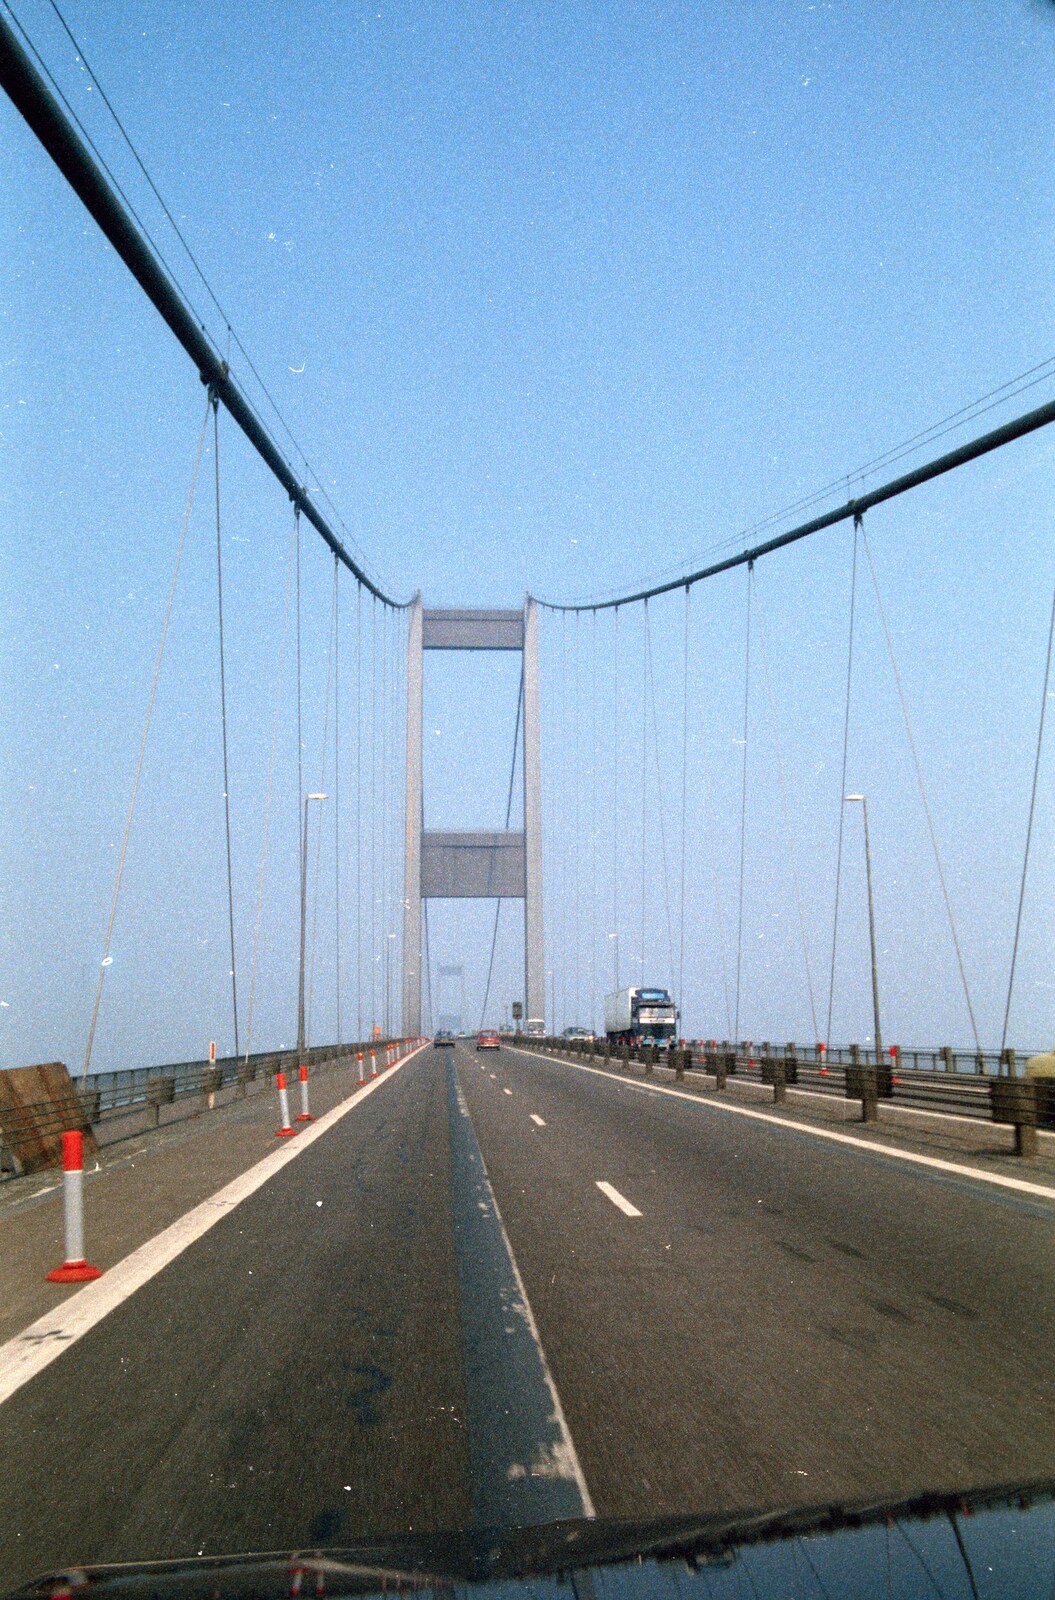 A view of the cables as we drive over the Severn Bridge from A Trip to Chepstow, Monmouthshire, Wales - 5th July 1986